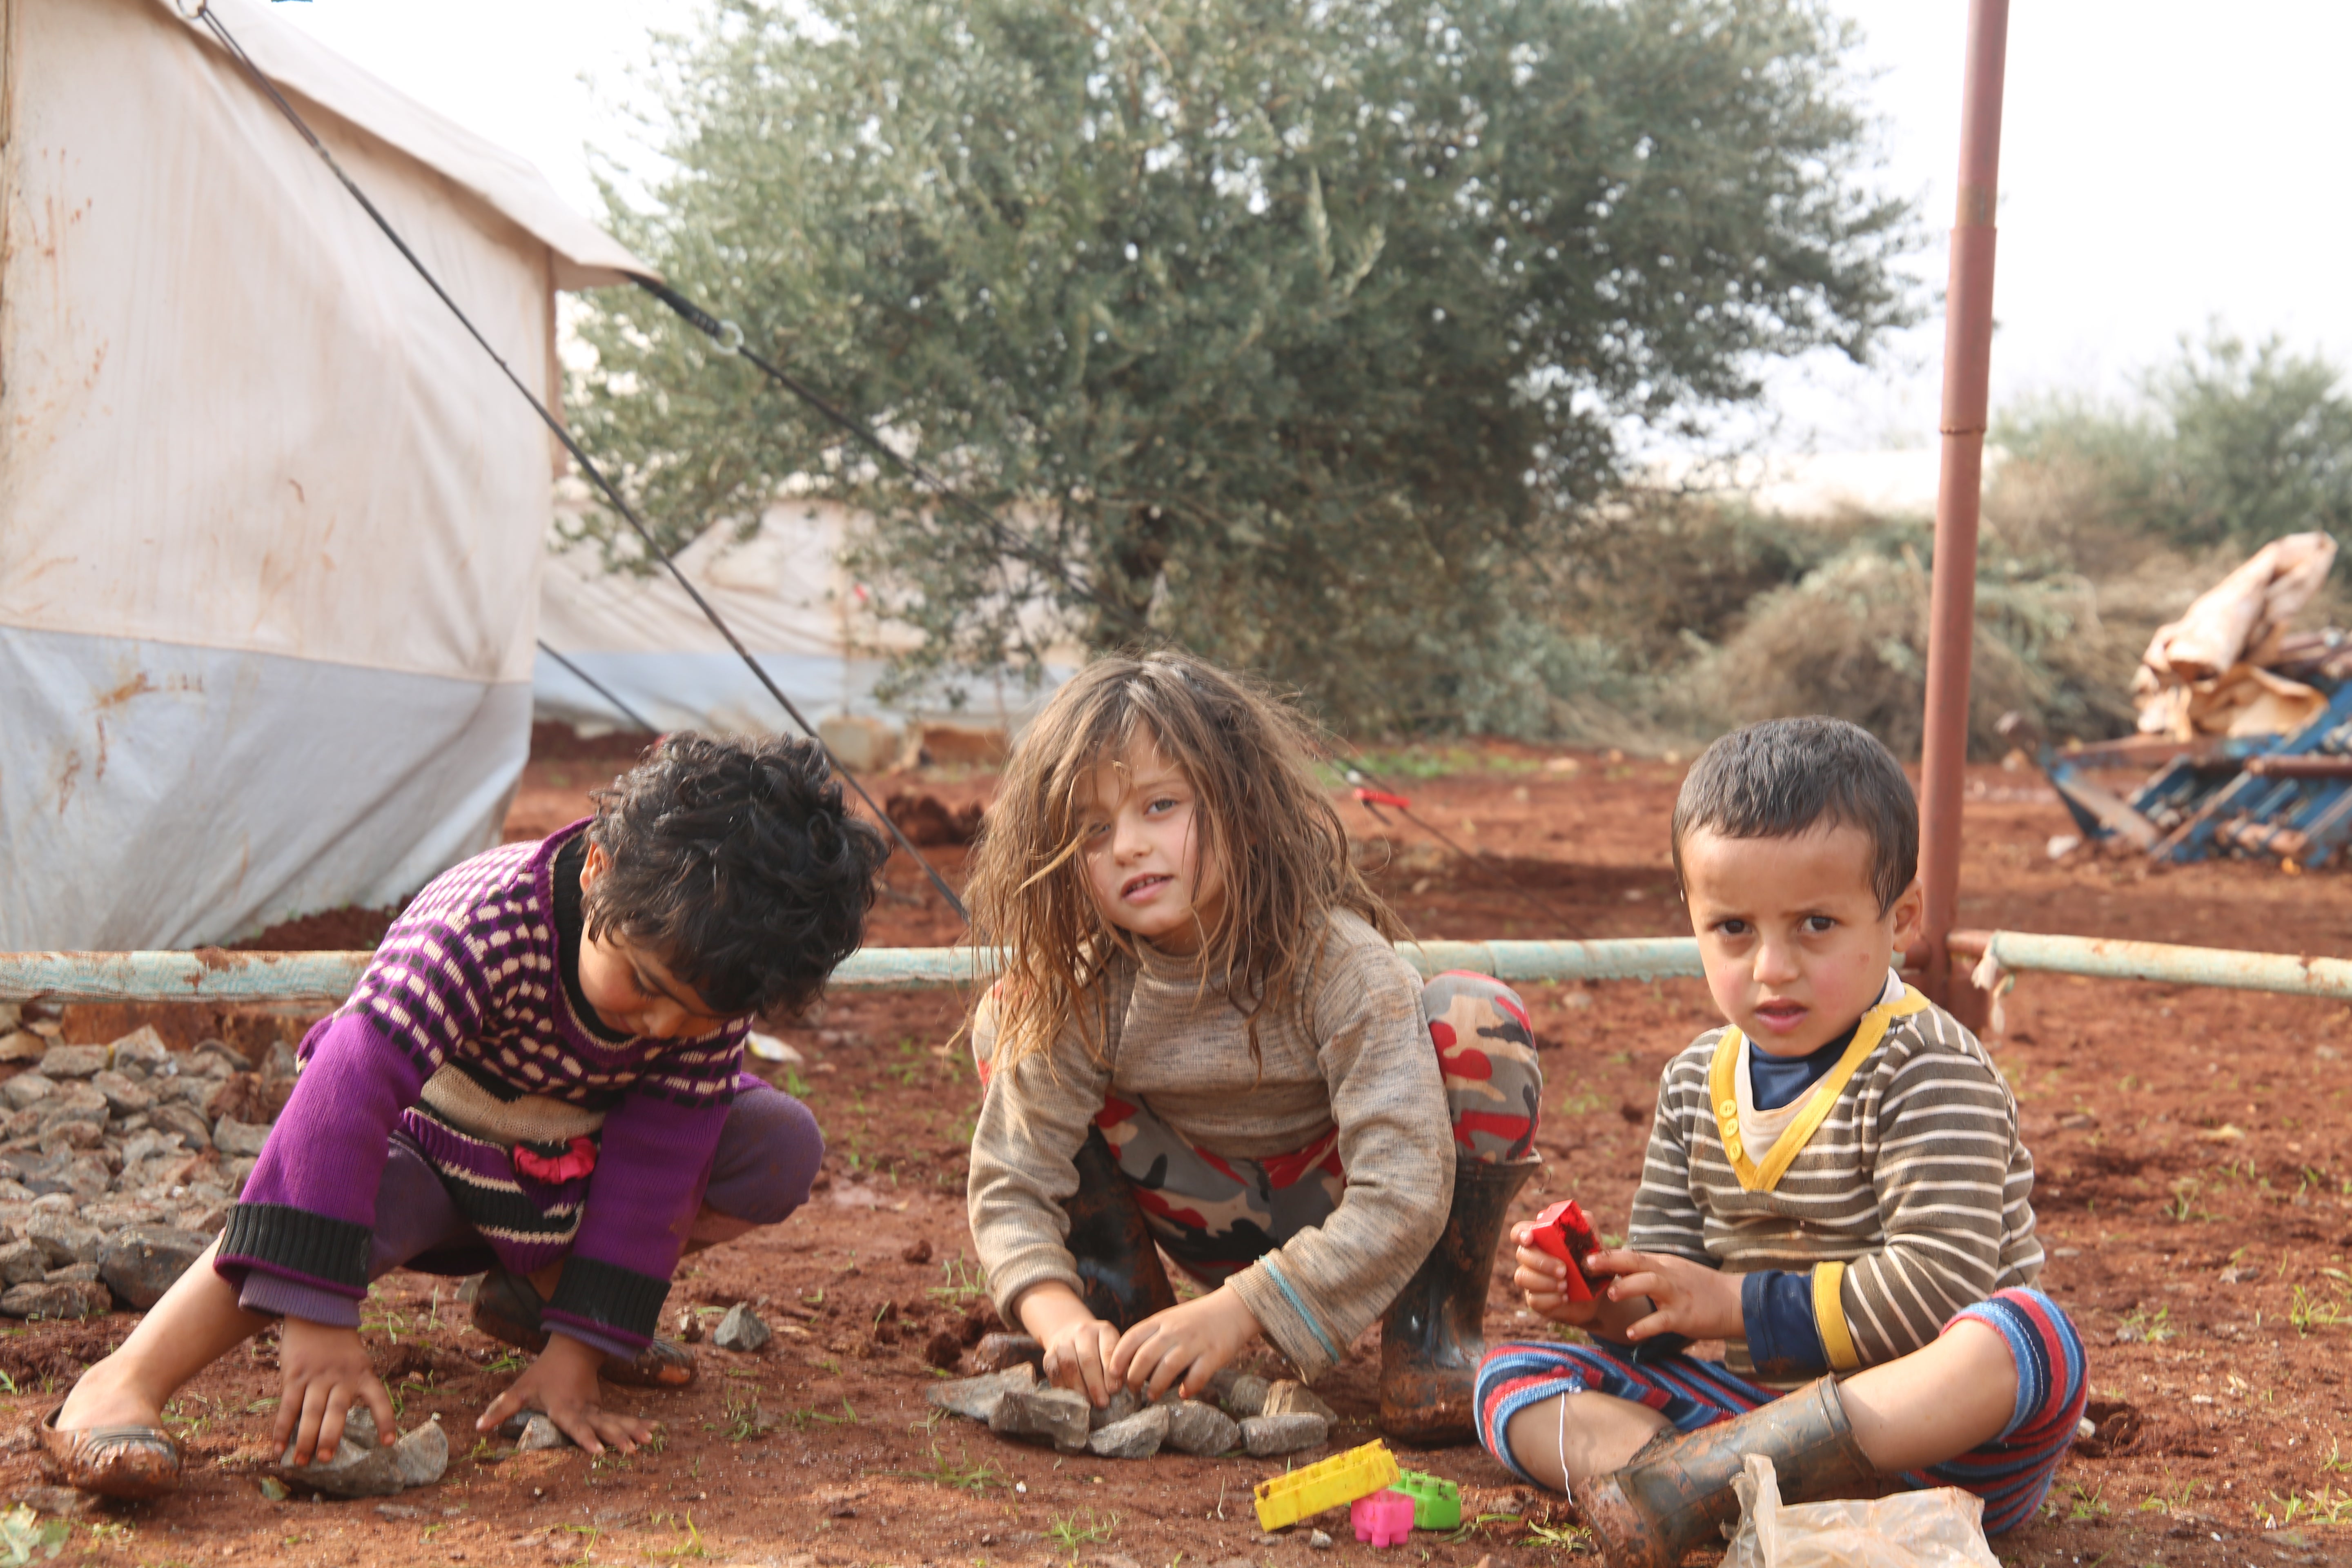 Three young children playing in the dirt outside their makeshift home.